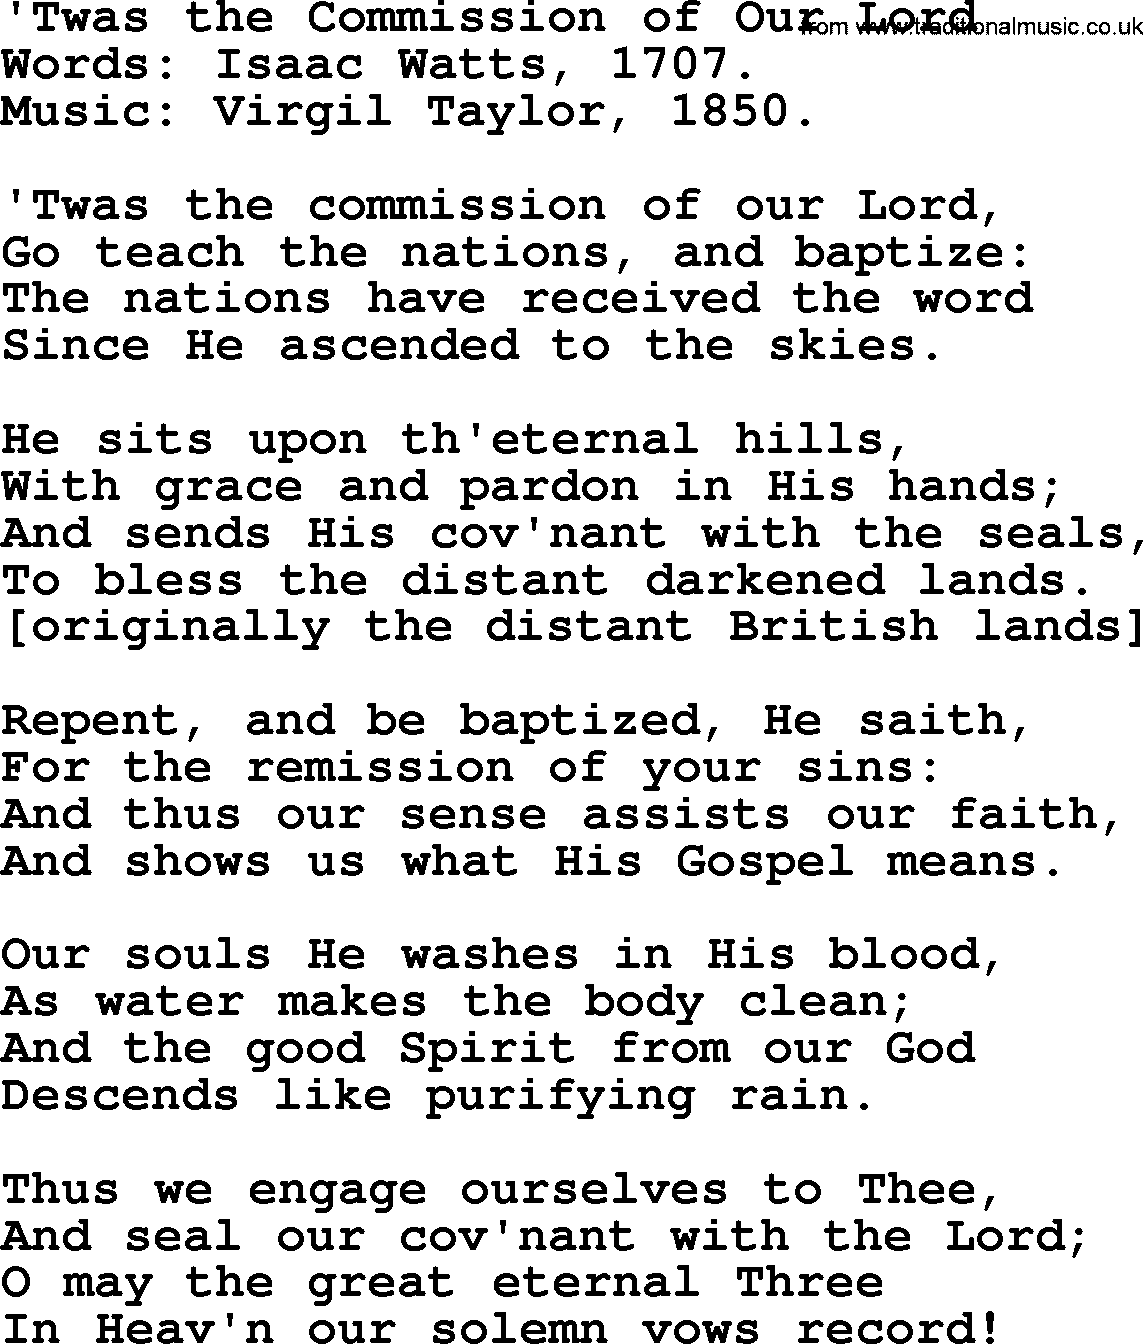 Isaac Watts Christian hymn: 'Twas the Commission of Our Lord- lyricss